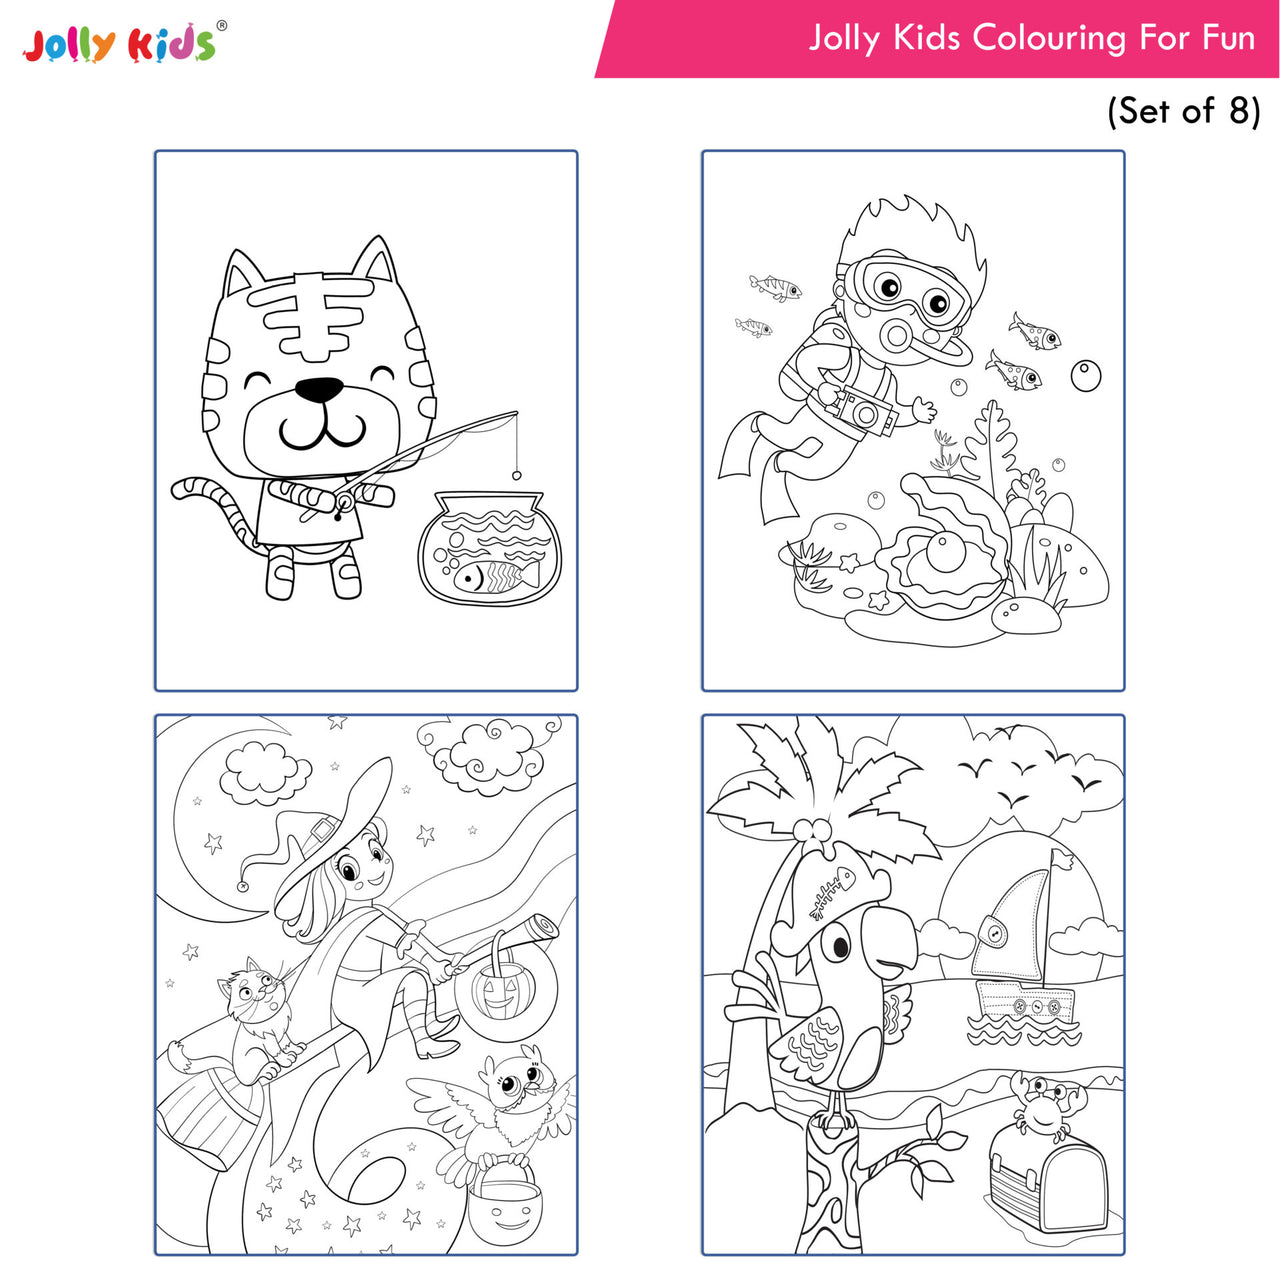 Jolly Kids Colouring for Fun Books For Kids Set of 8| Each Book 64 Images| Colouring & Painting Books| Ages 3 - 8 Year - Distacart